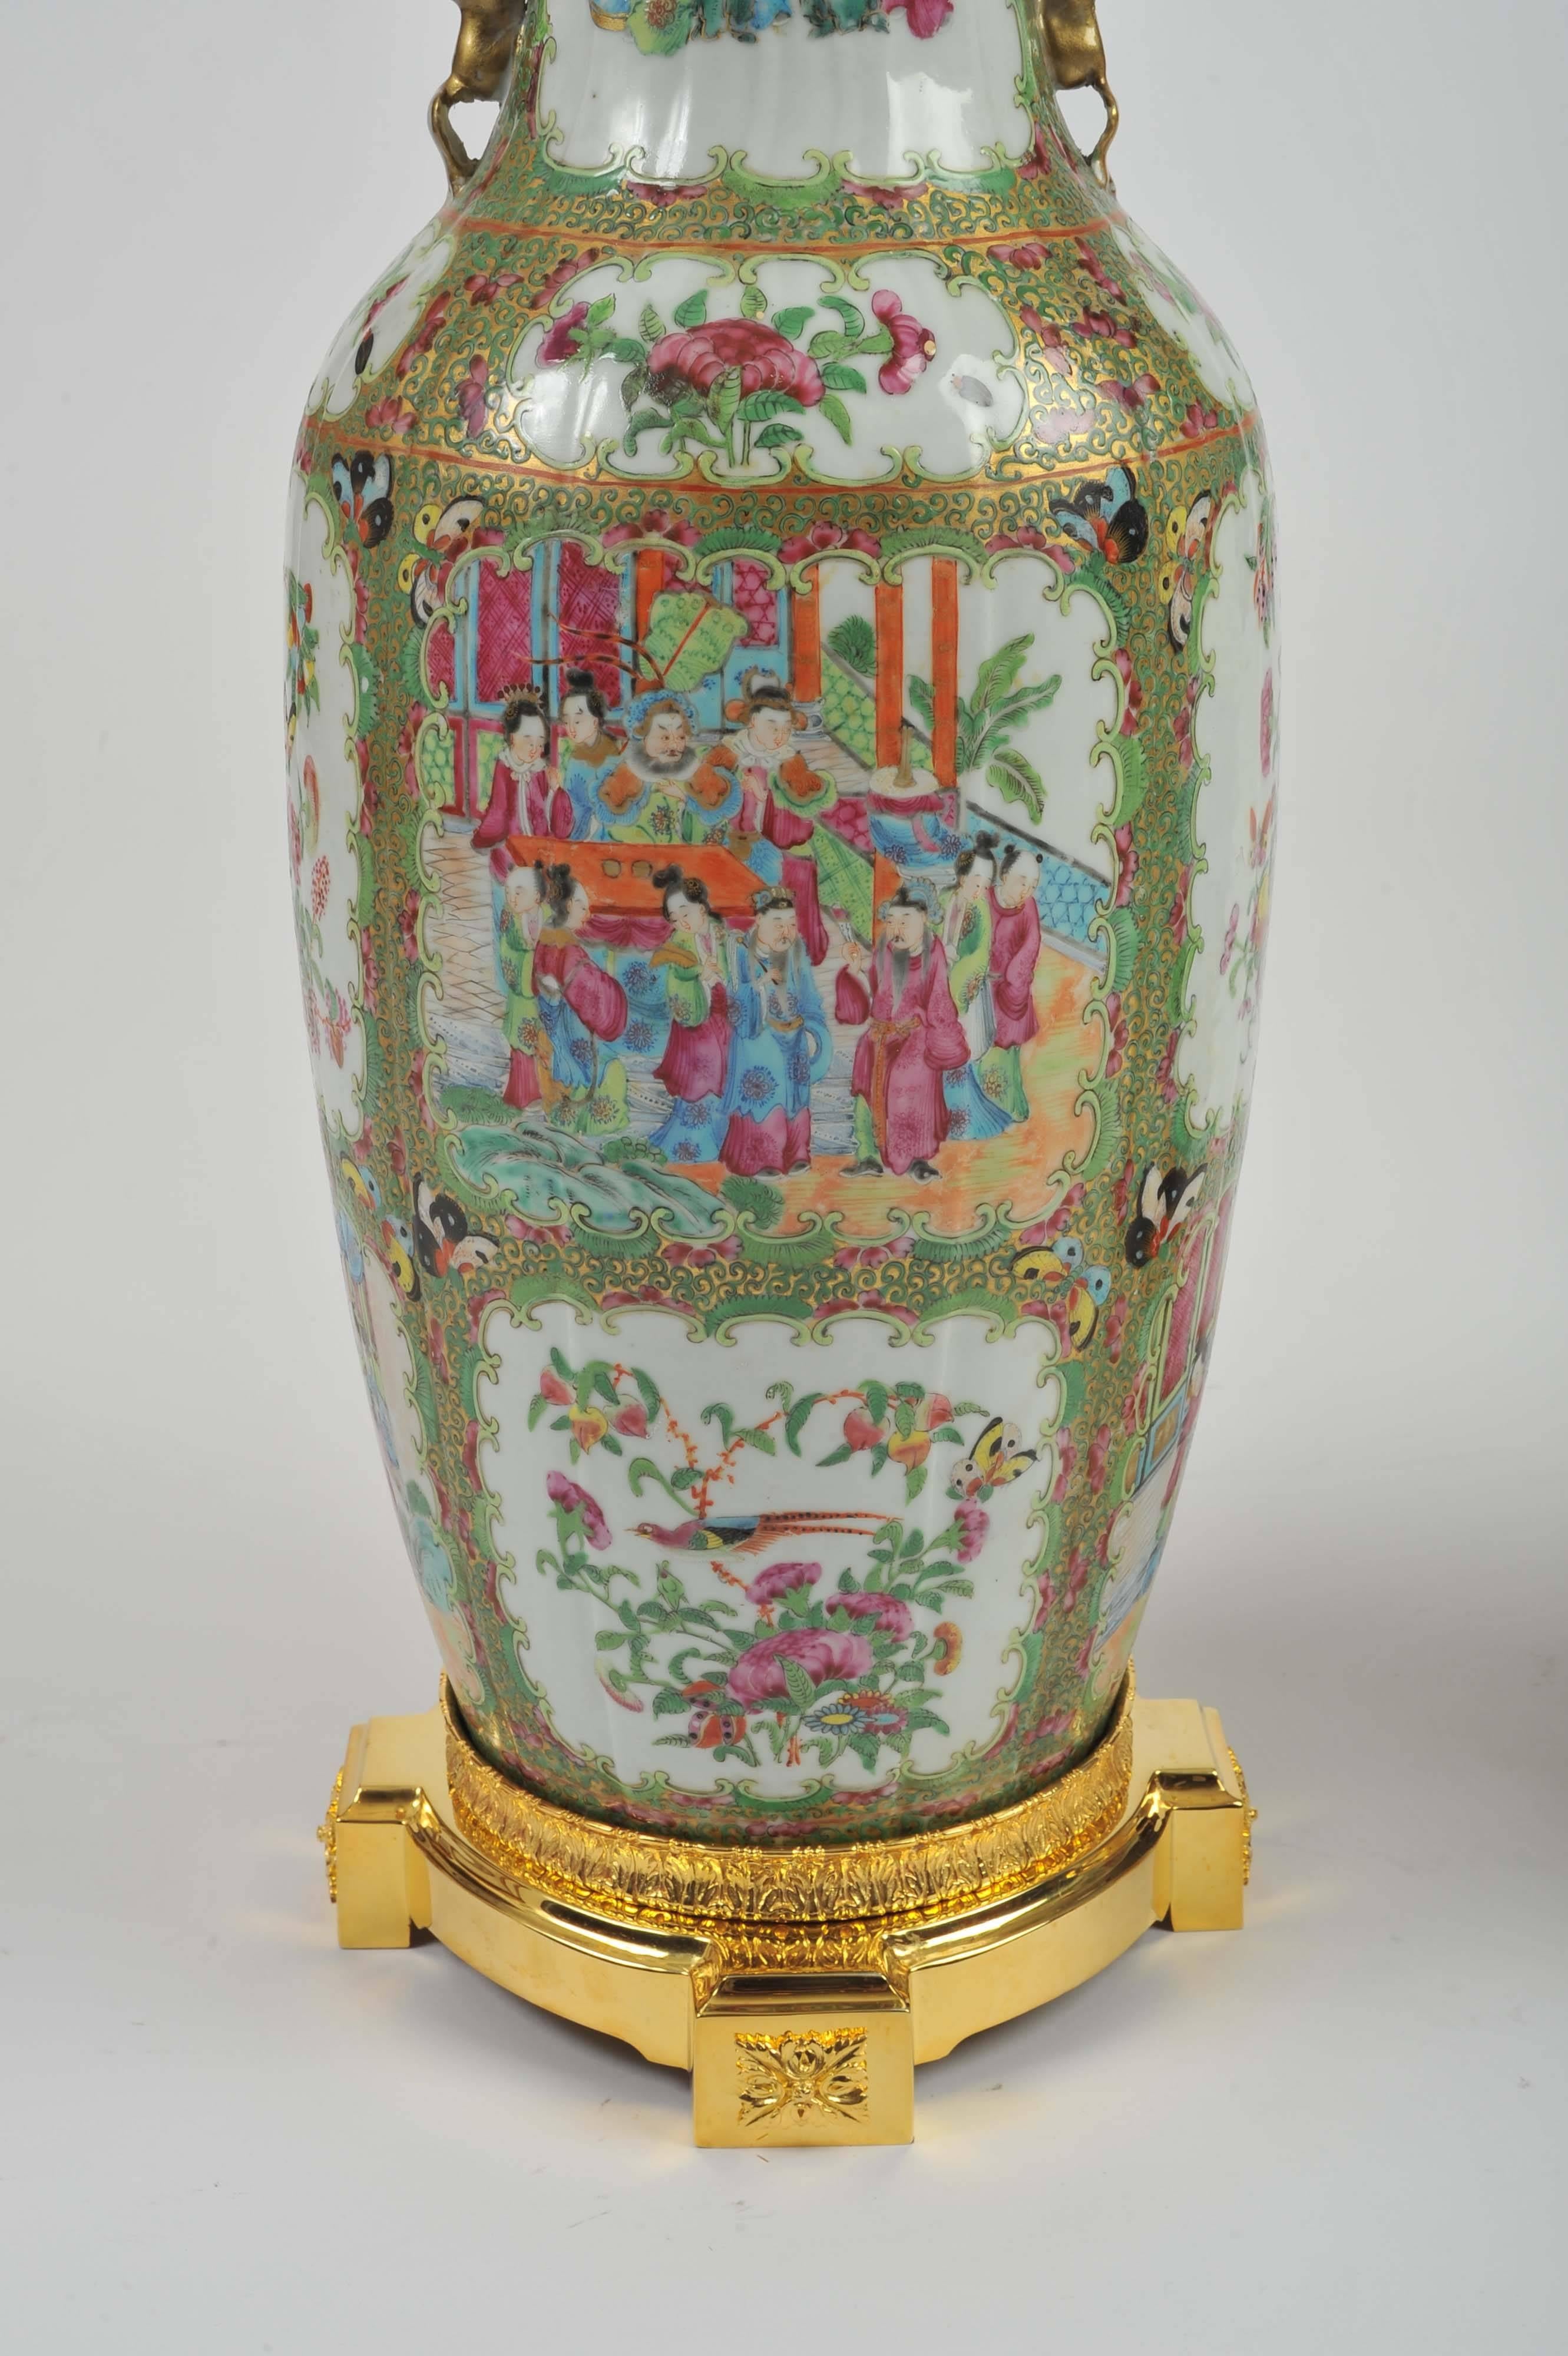 This lovely pair of Canton vases that were converted to lamps feature ornate ormolu mounts to the top and the base, and are hand-painted with a detailed design of family figures in an garden setting with various bird and floral motifs against a